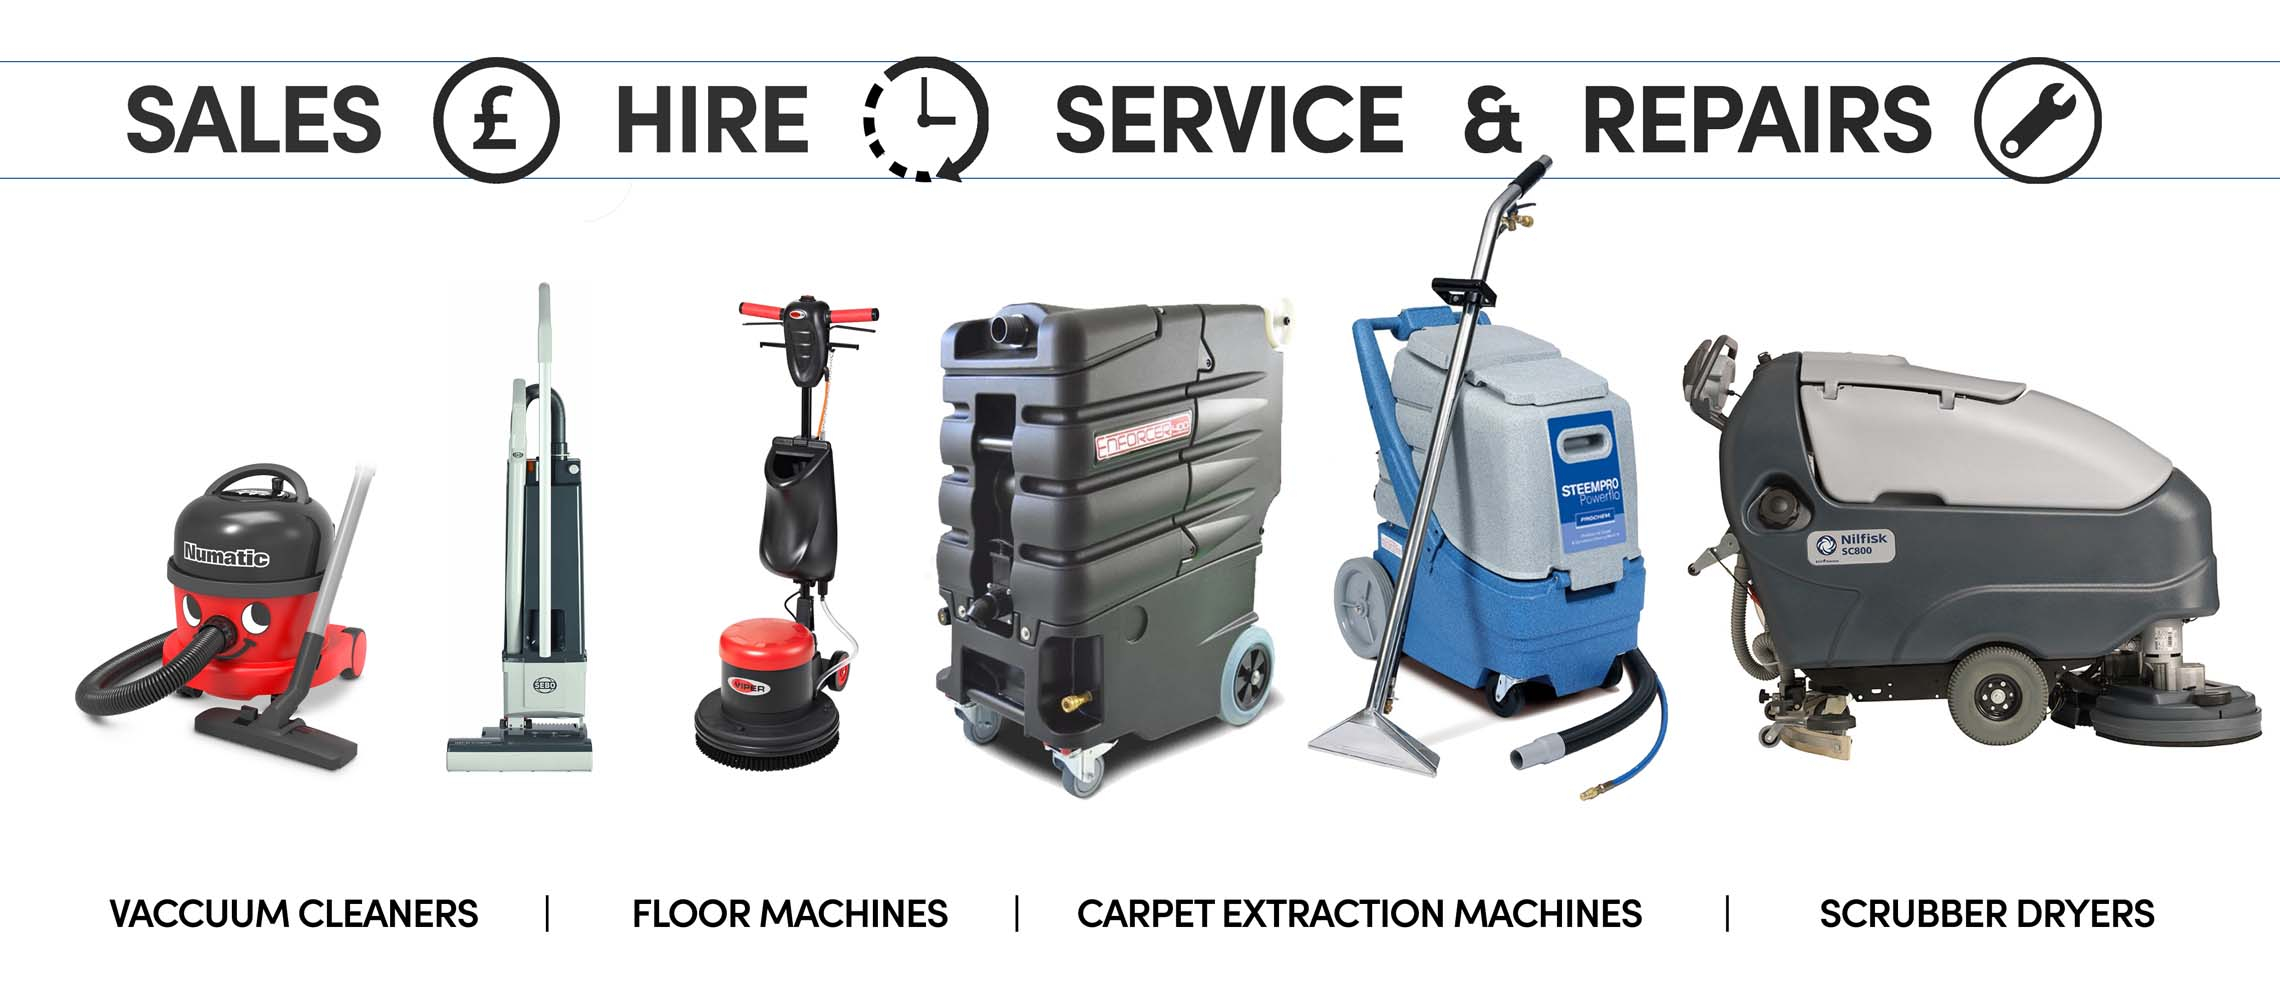 Cleaning machine repairs, parts and servicing under one roof